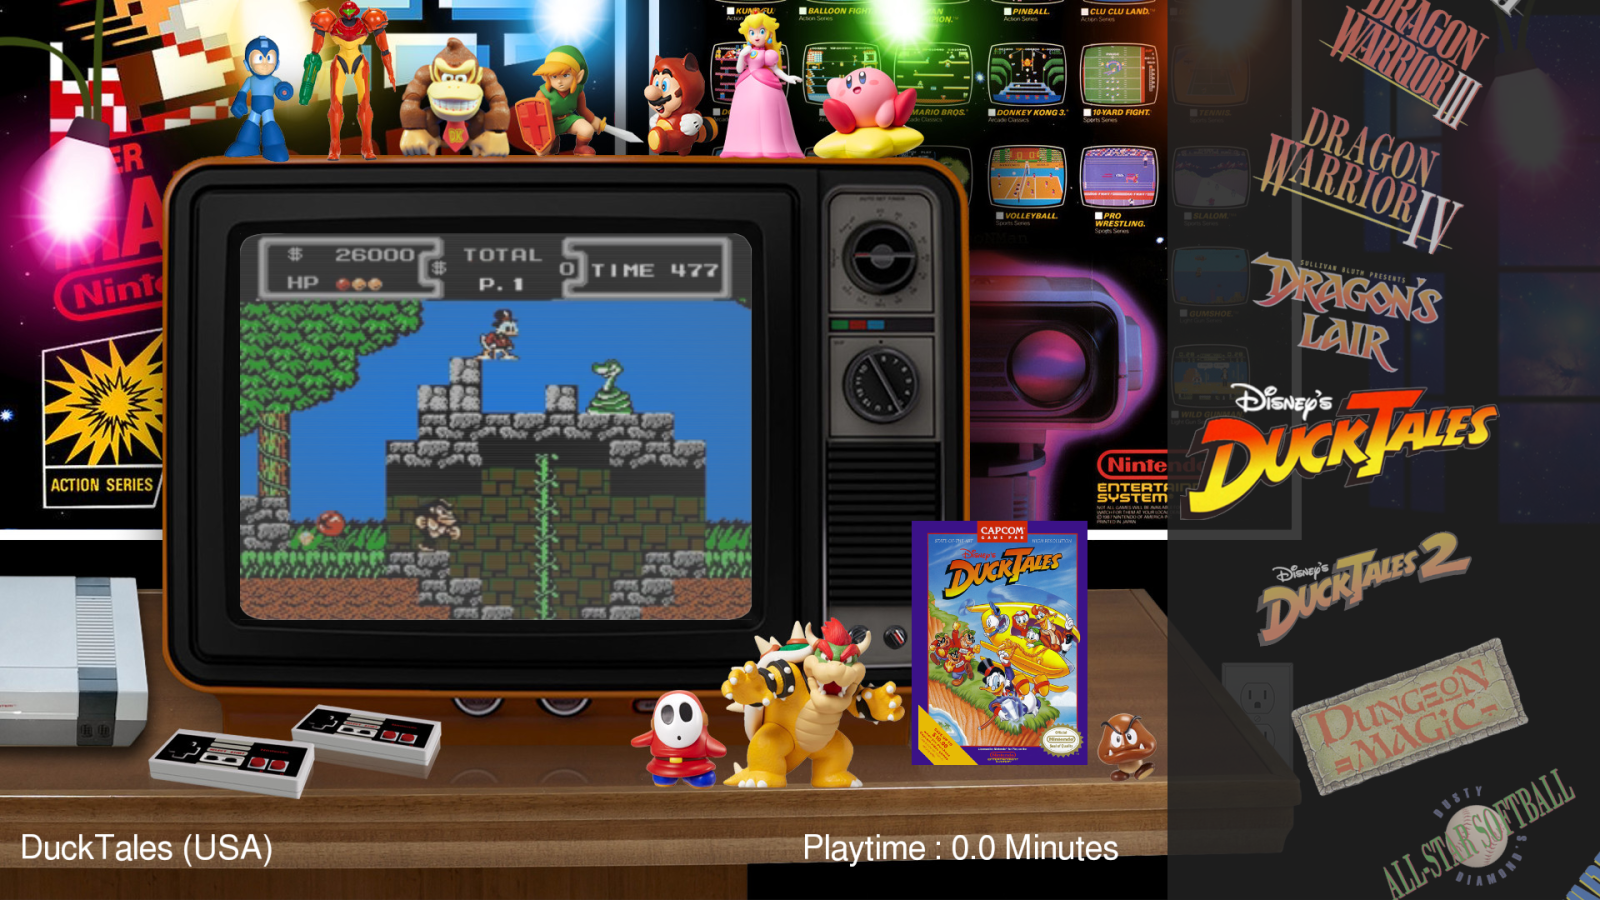 Download List Of Themes Included - Retropie Old Room Theme PNG Image with N...